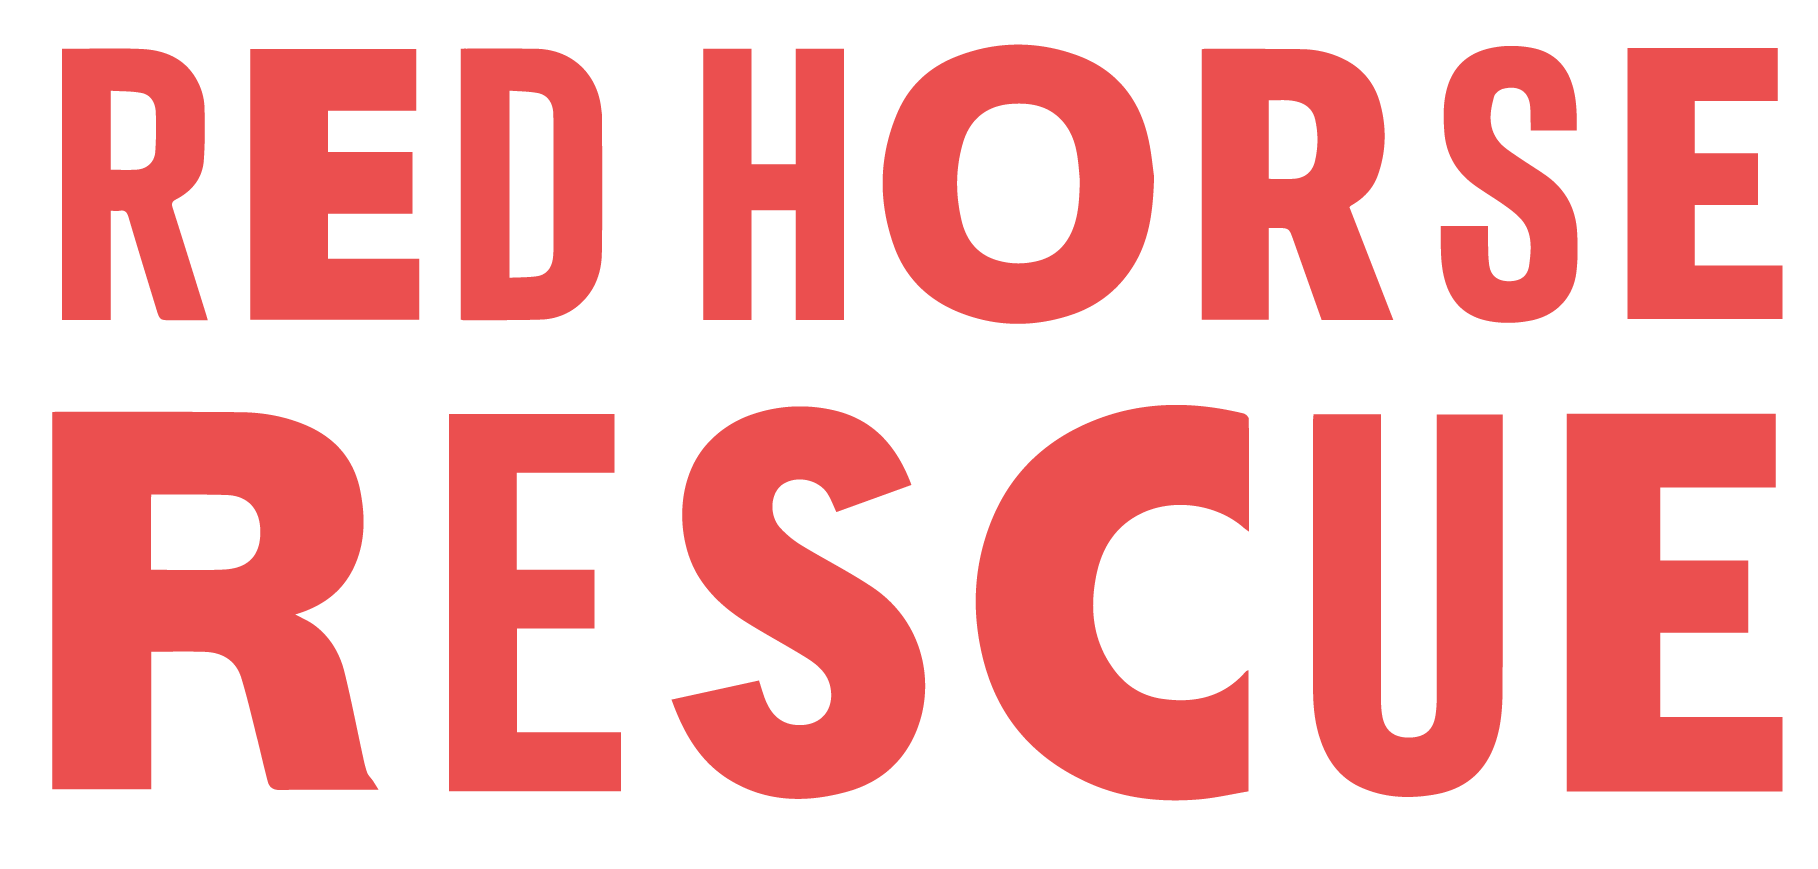 Red Horse Rescue